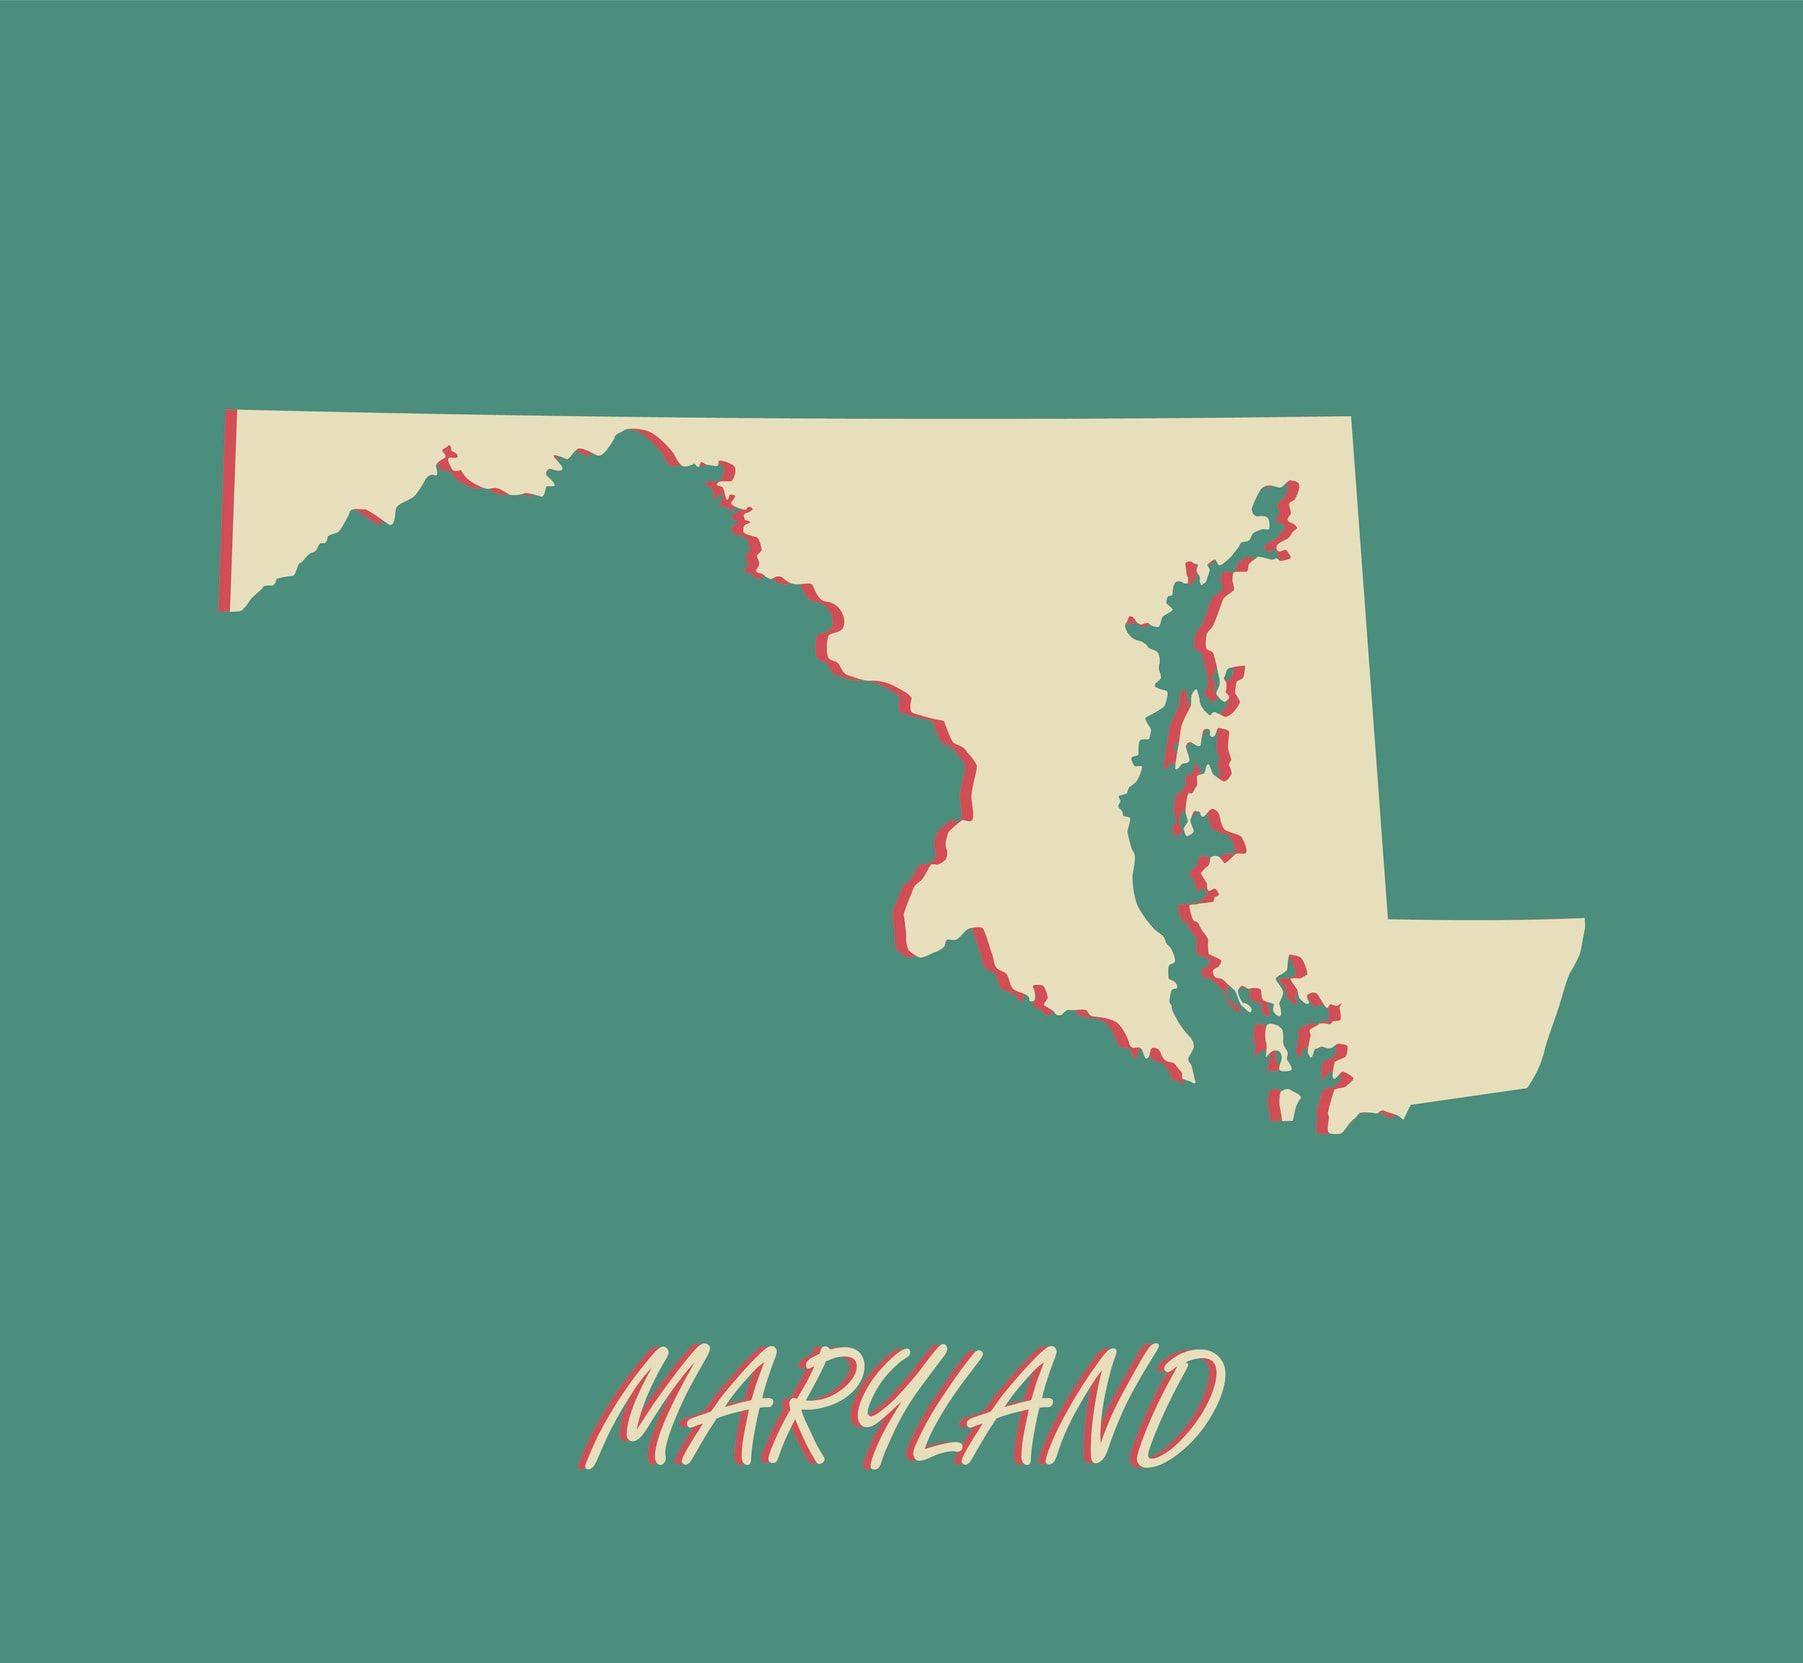 Maryland household employment tax and labor law guide